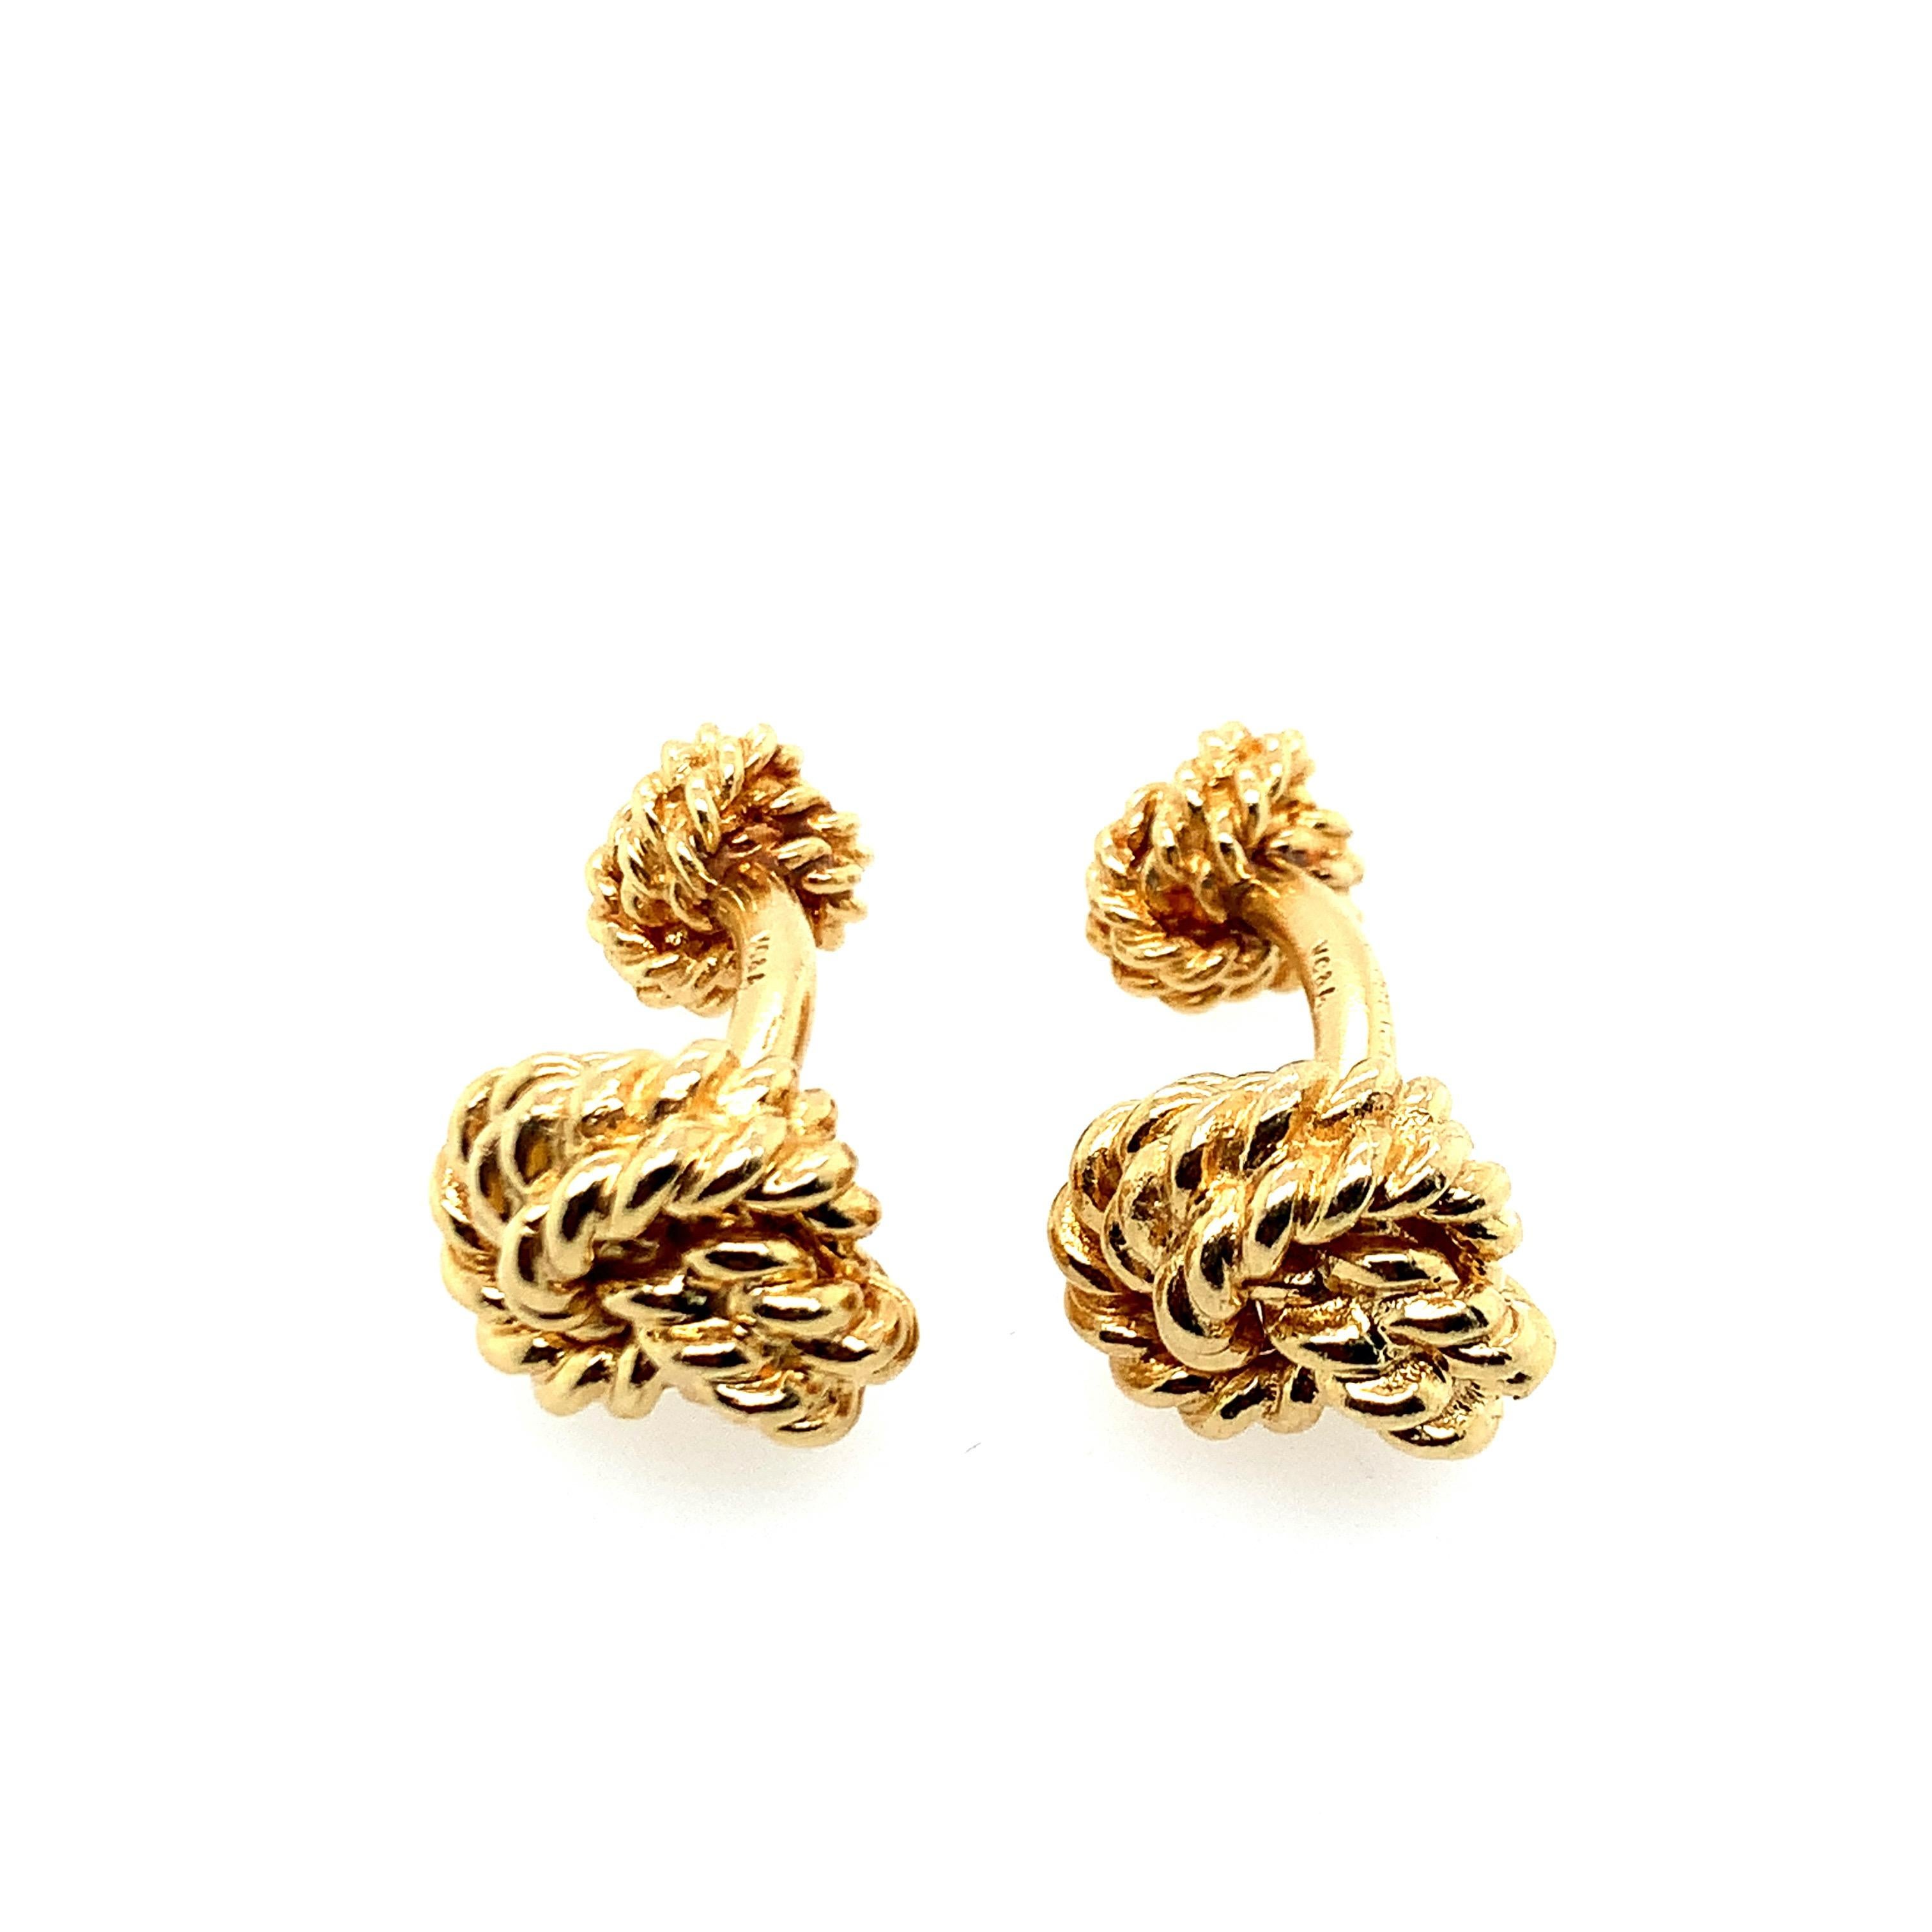 Van Cleef & Arpels Gold Rope Cufflinks In Excellent Condition For Sale In New York, NY